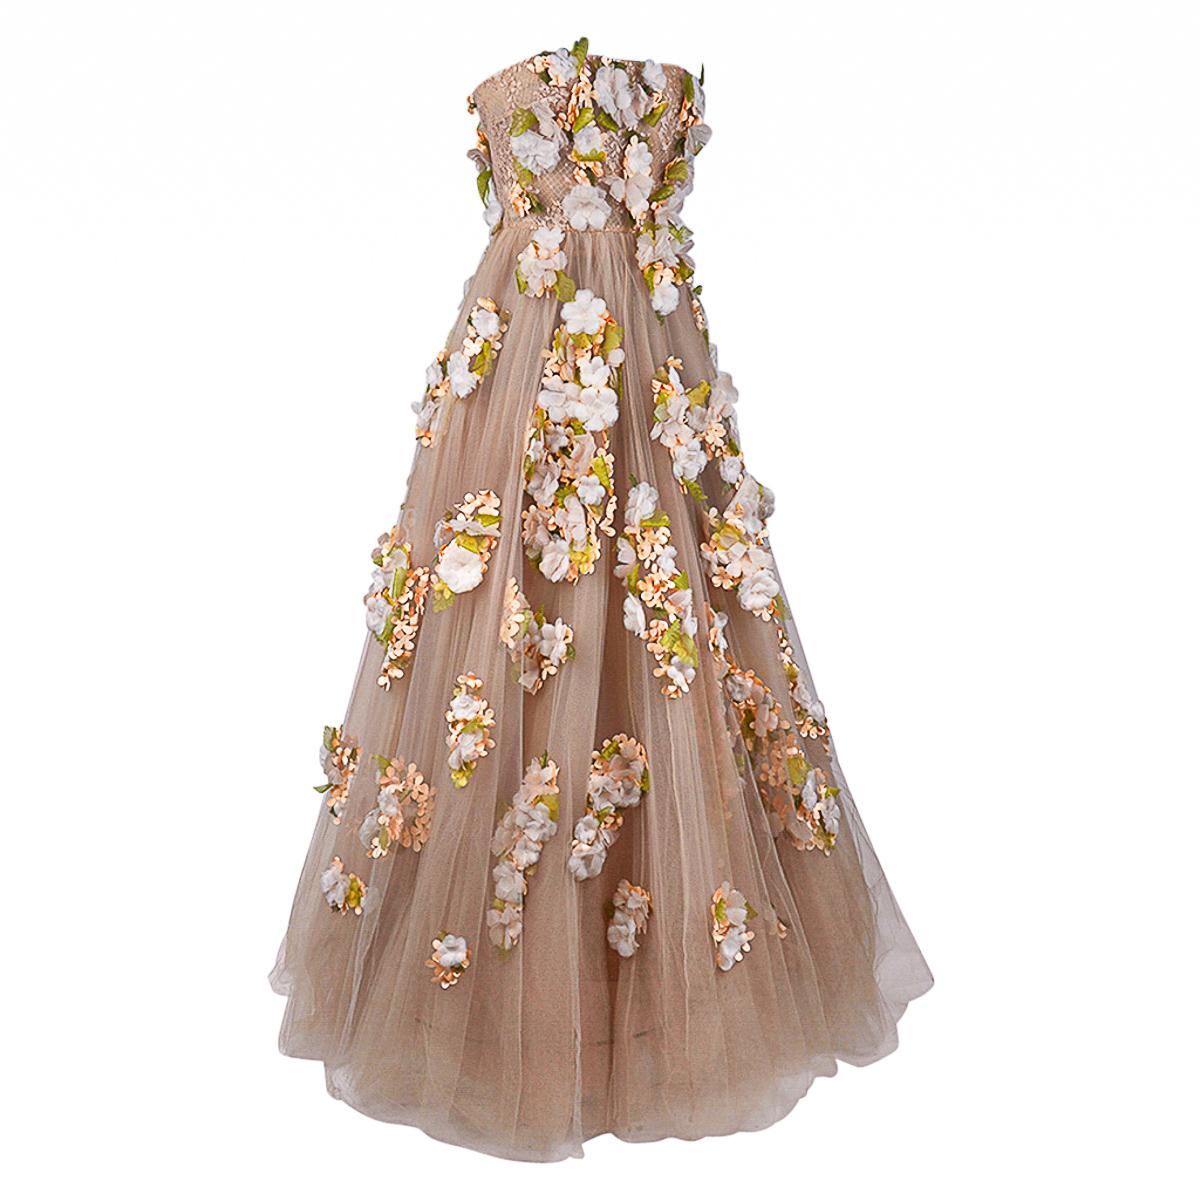 Valentino Strapless Empire Nude Flower Adorned Gown 1 of 2 Size 0 9